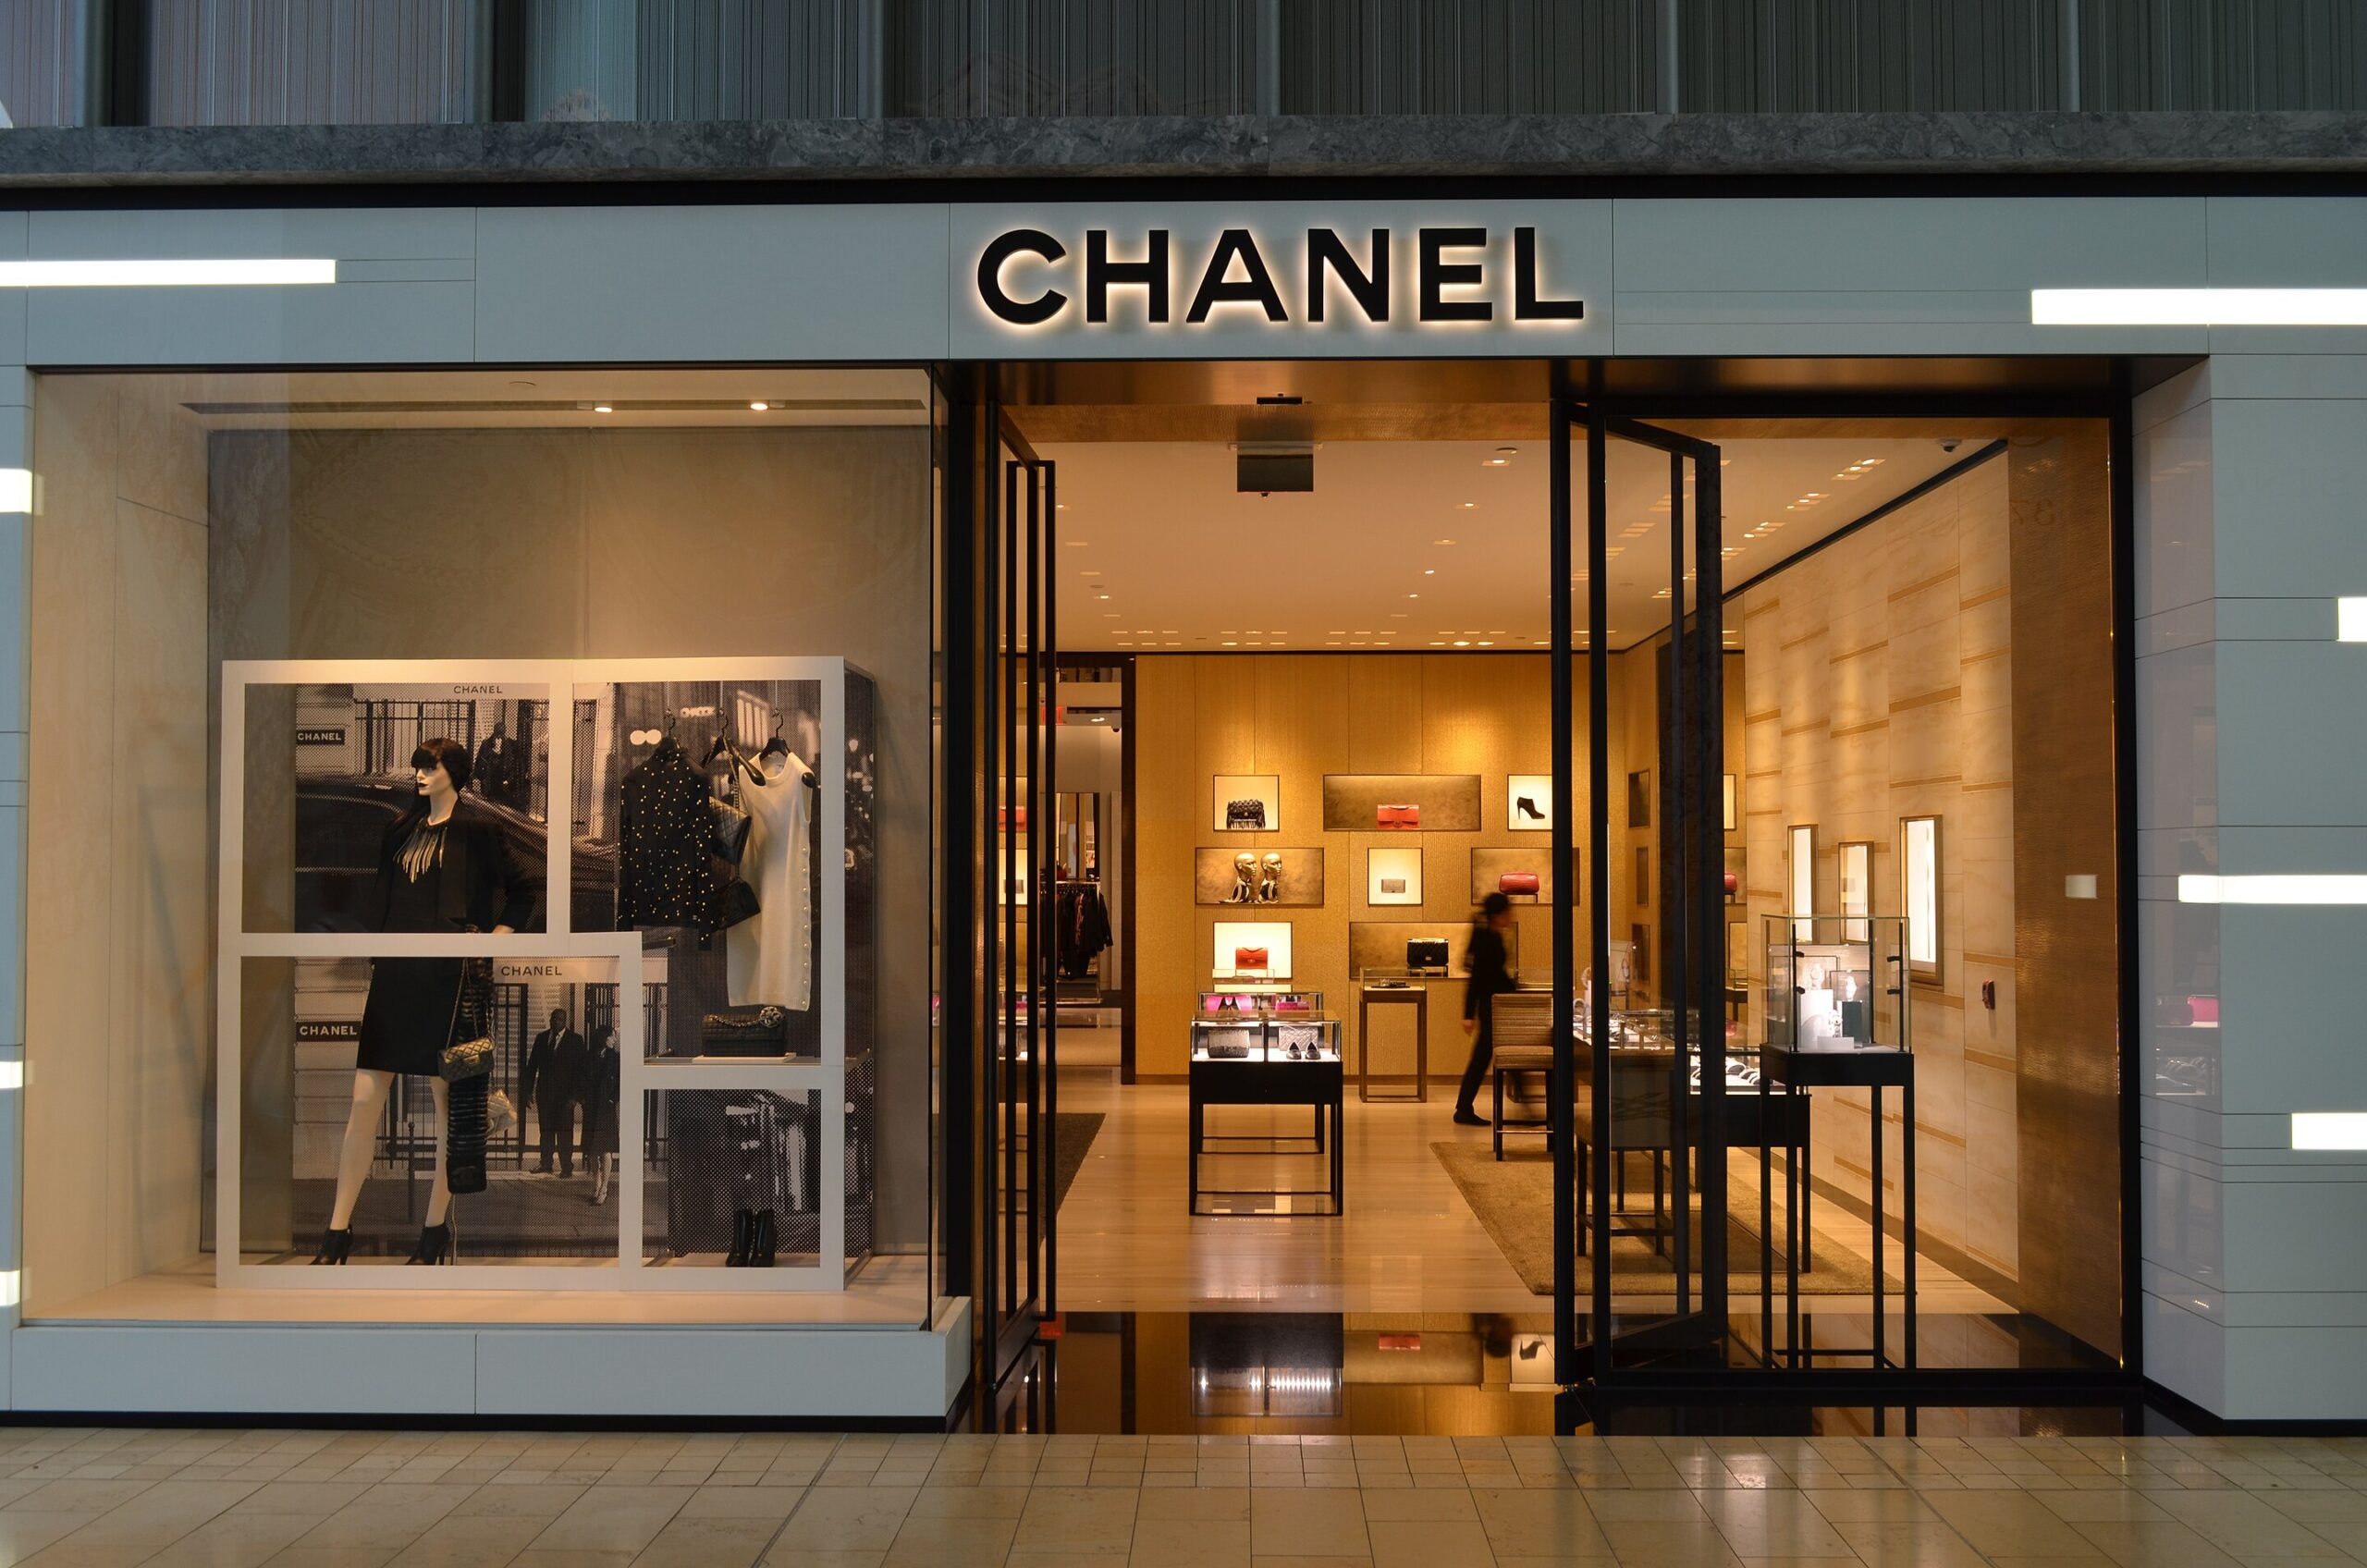 CHANEL store front